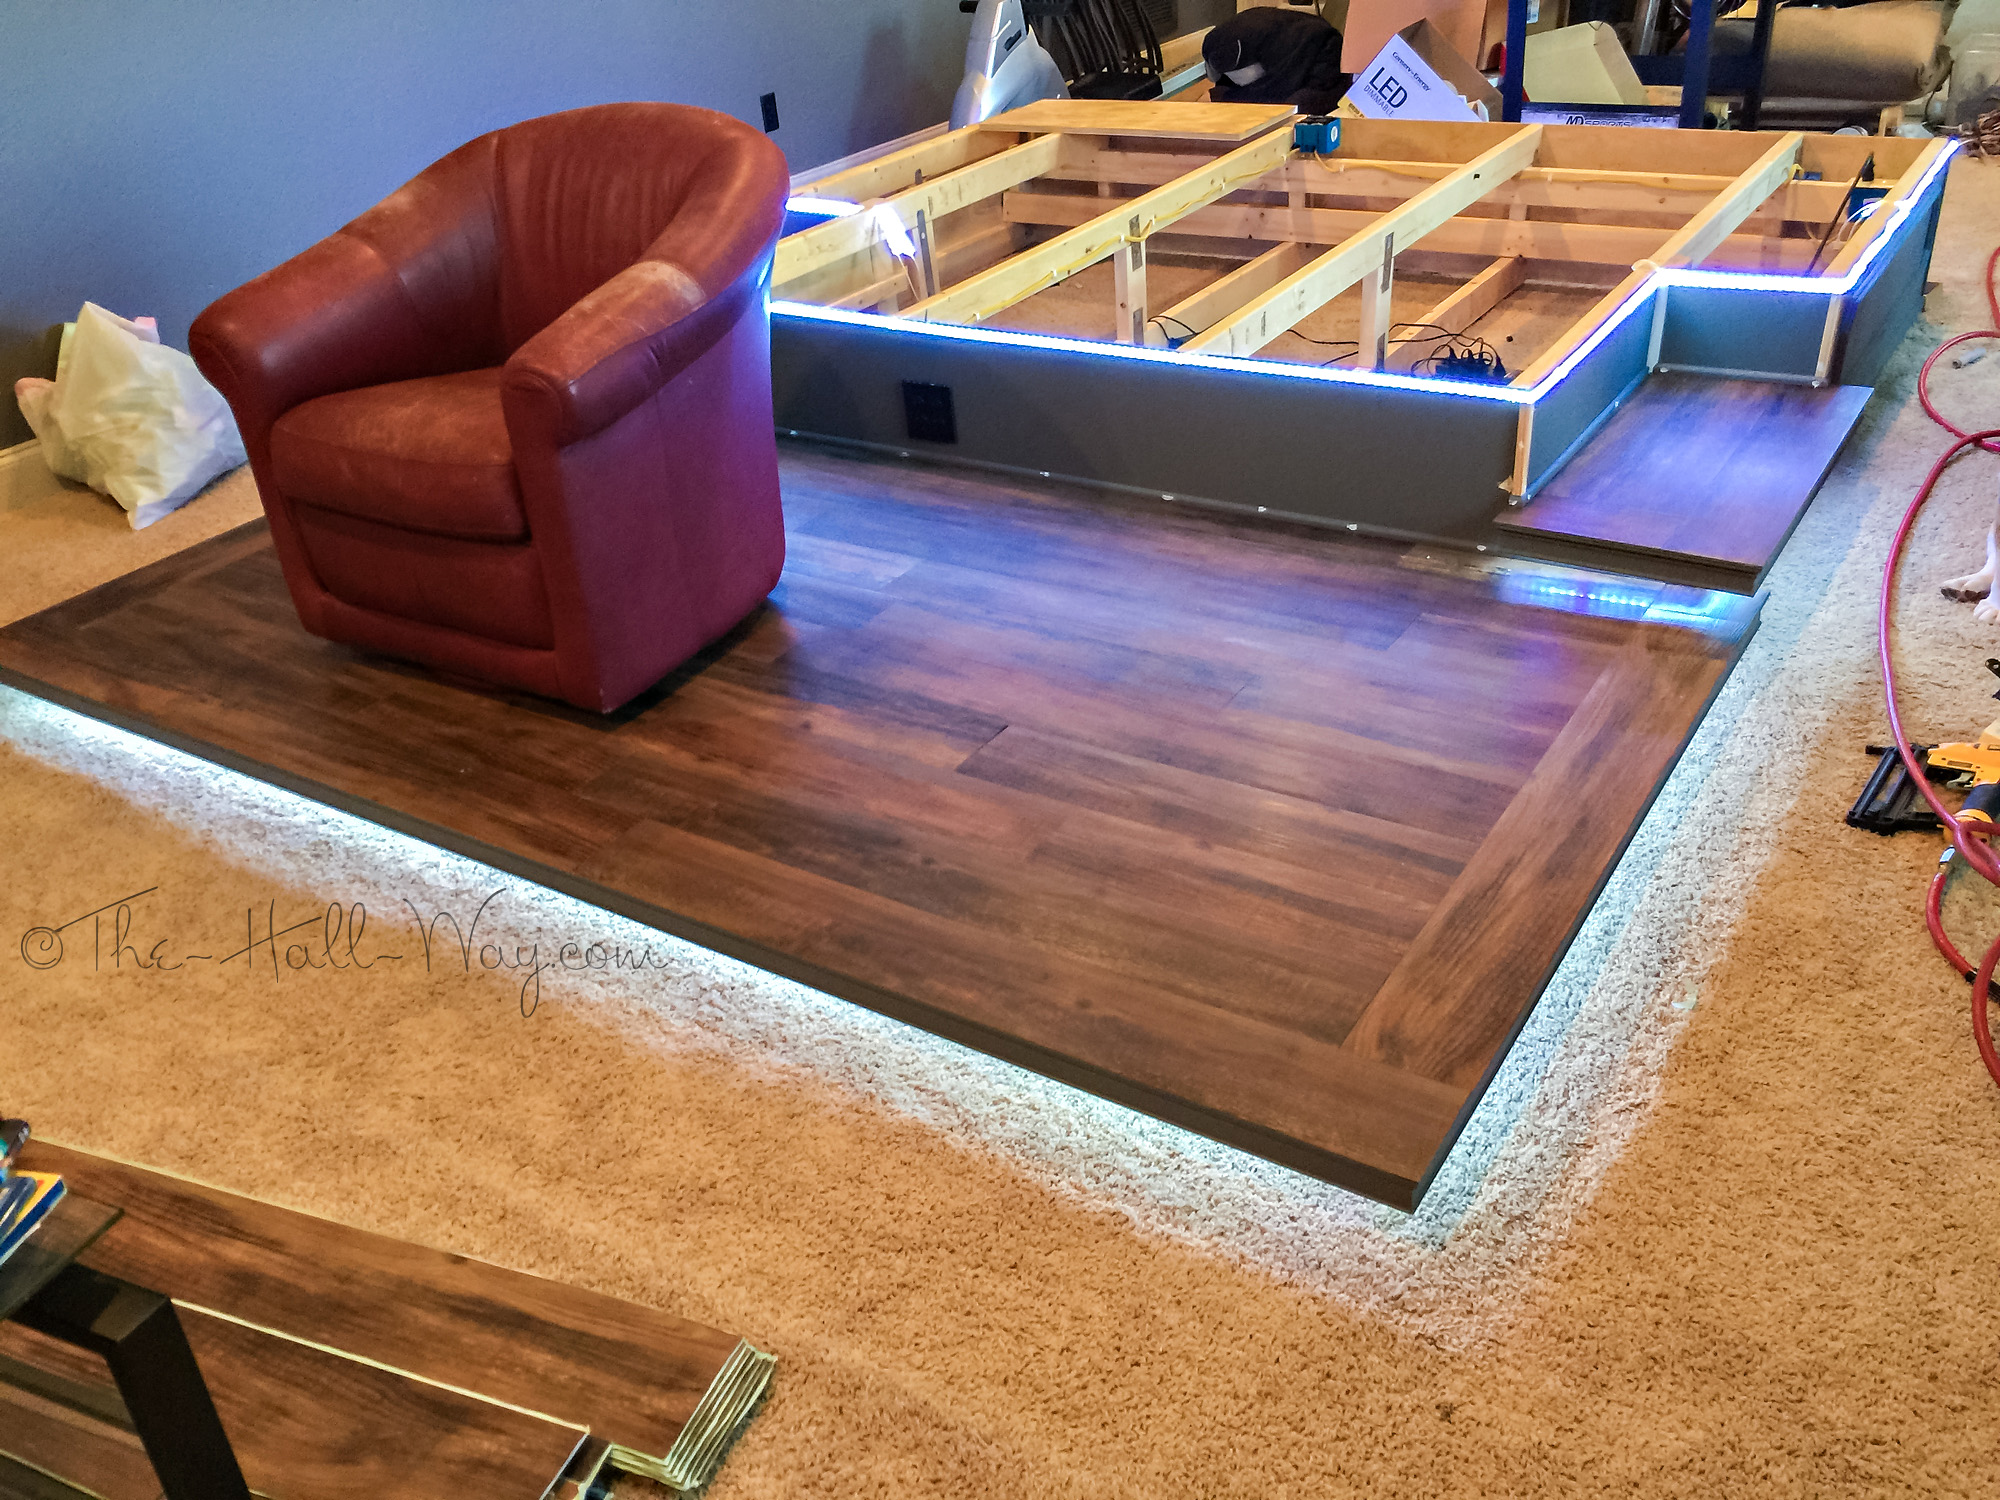 Home Theater – Part 7 | The Hall Way